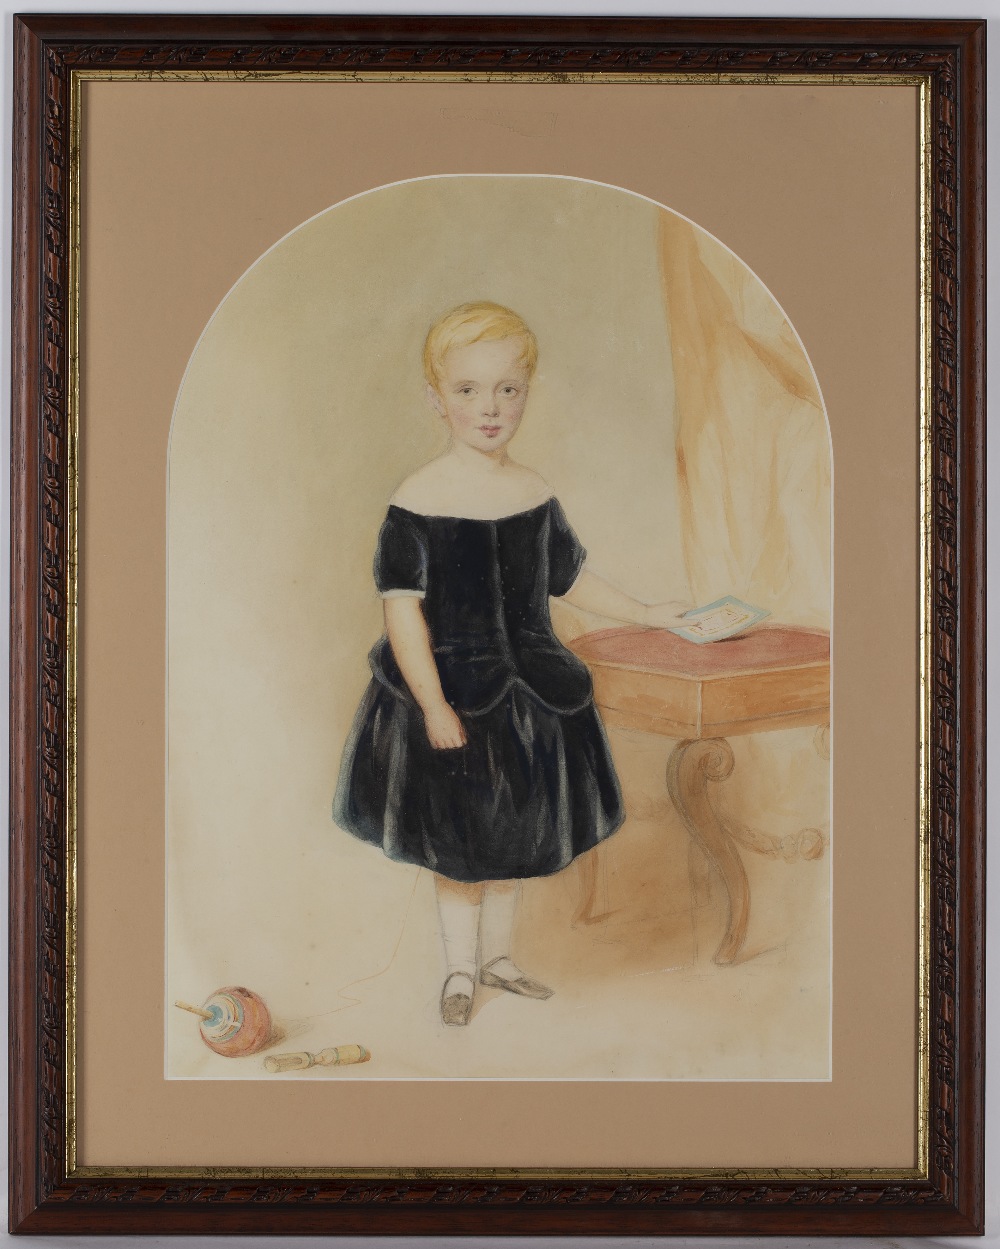 19th Century English School Portrait of a young child, standing beside a stool pencil and - Image 2 of 3